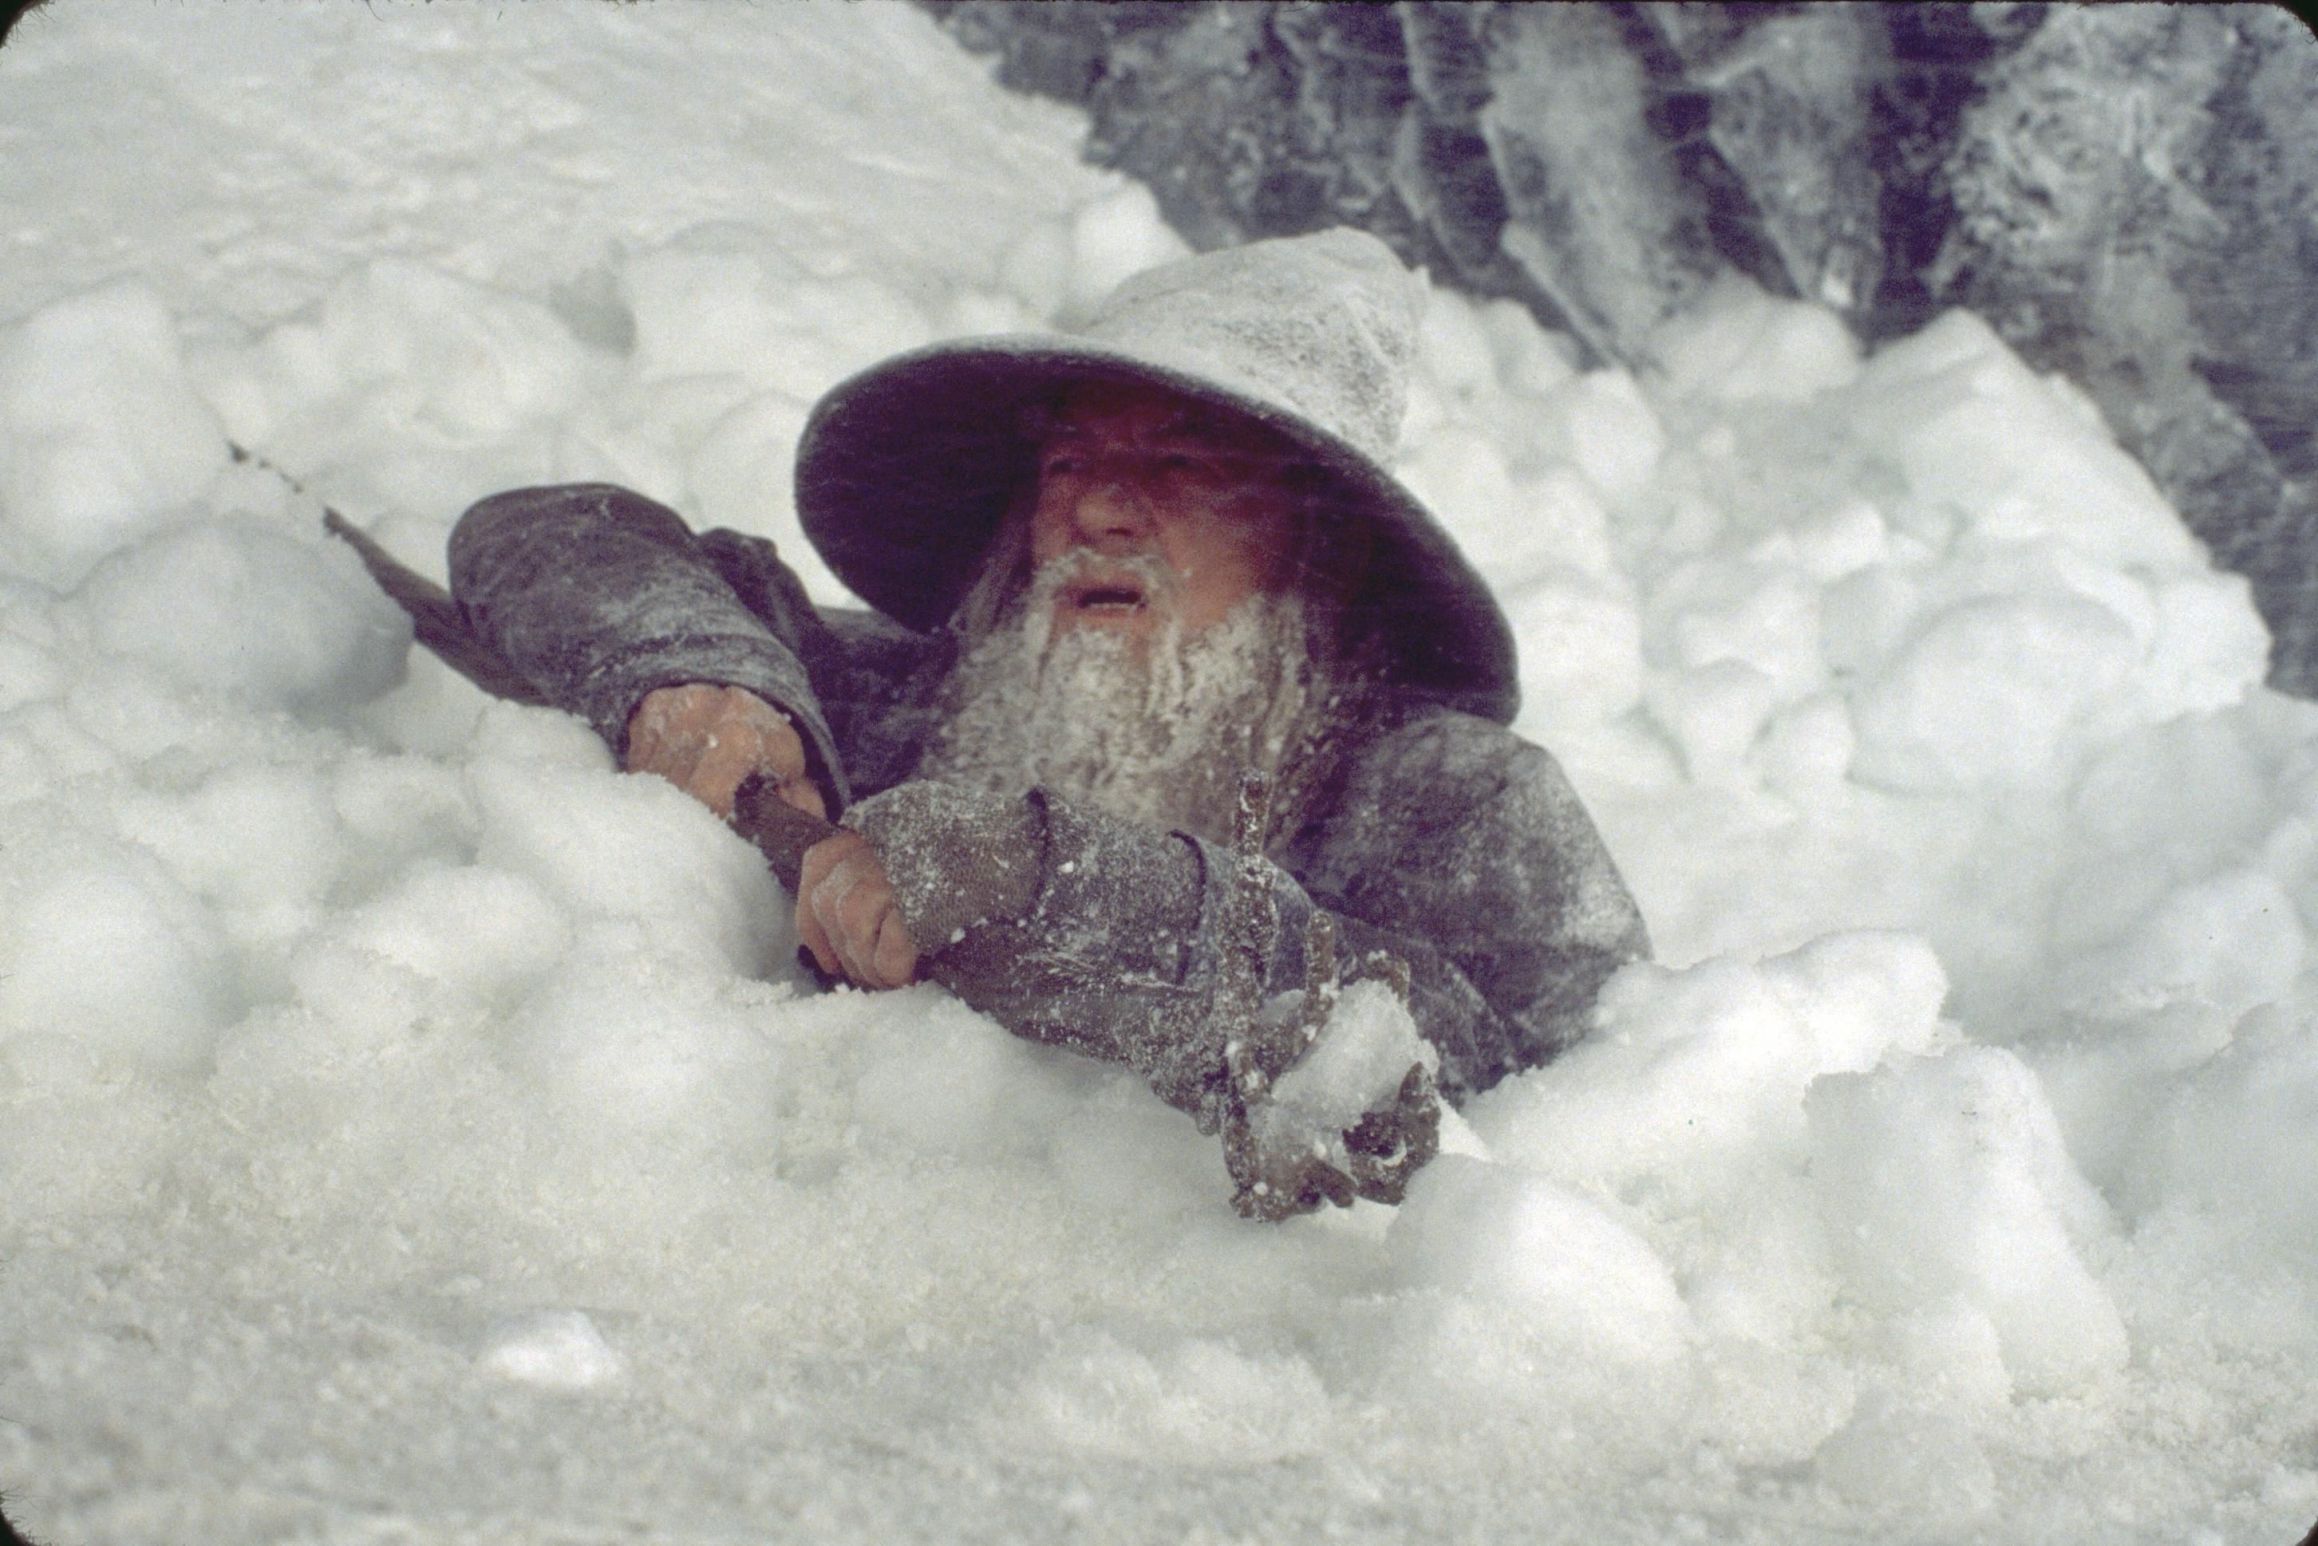 No "Gandalf snow" memes have been featured yet. 